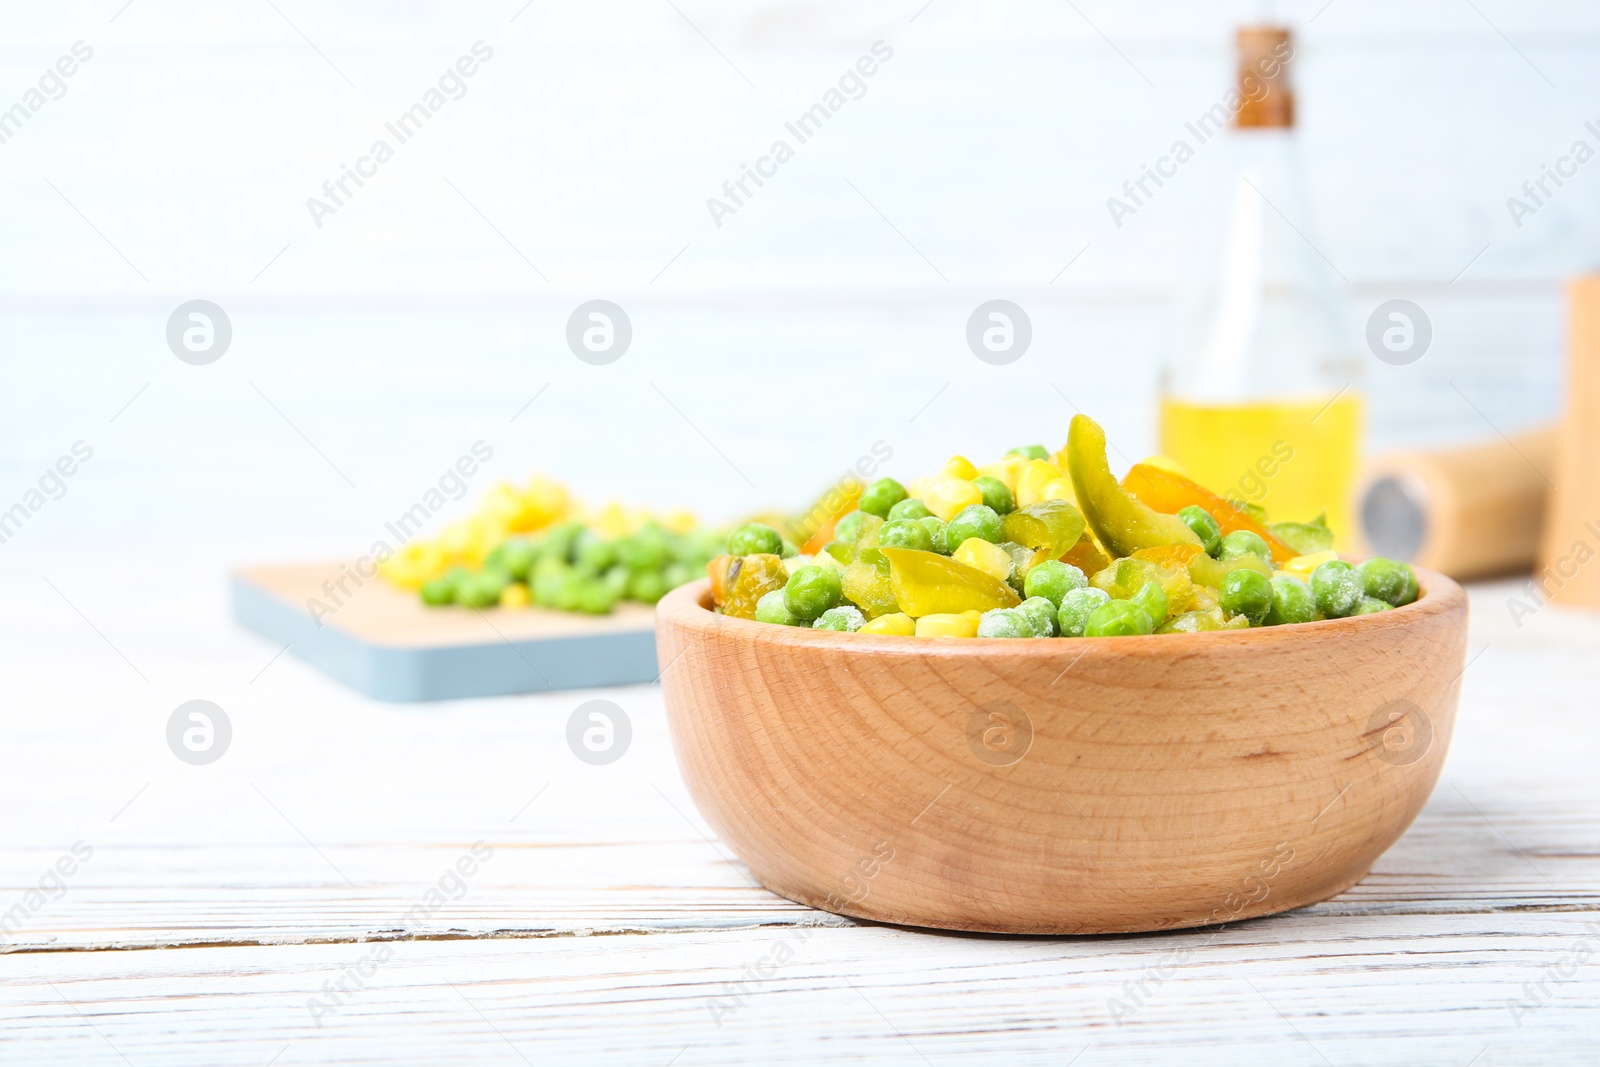 Photo of Bowl with frozen vegetable mix on wooden table